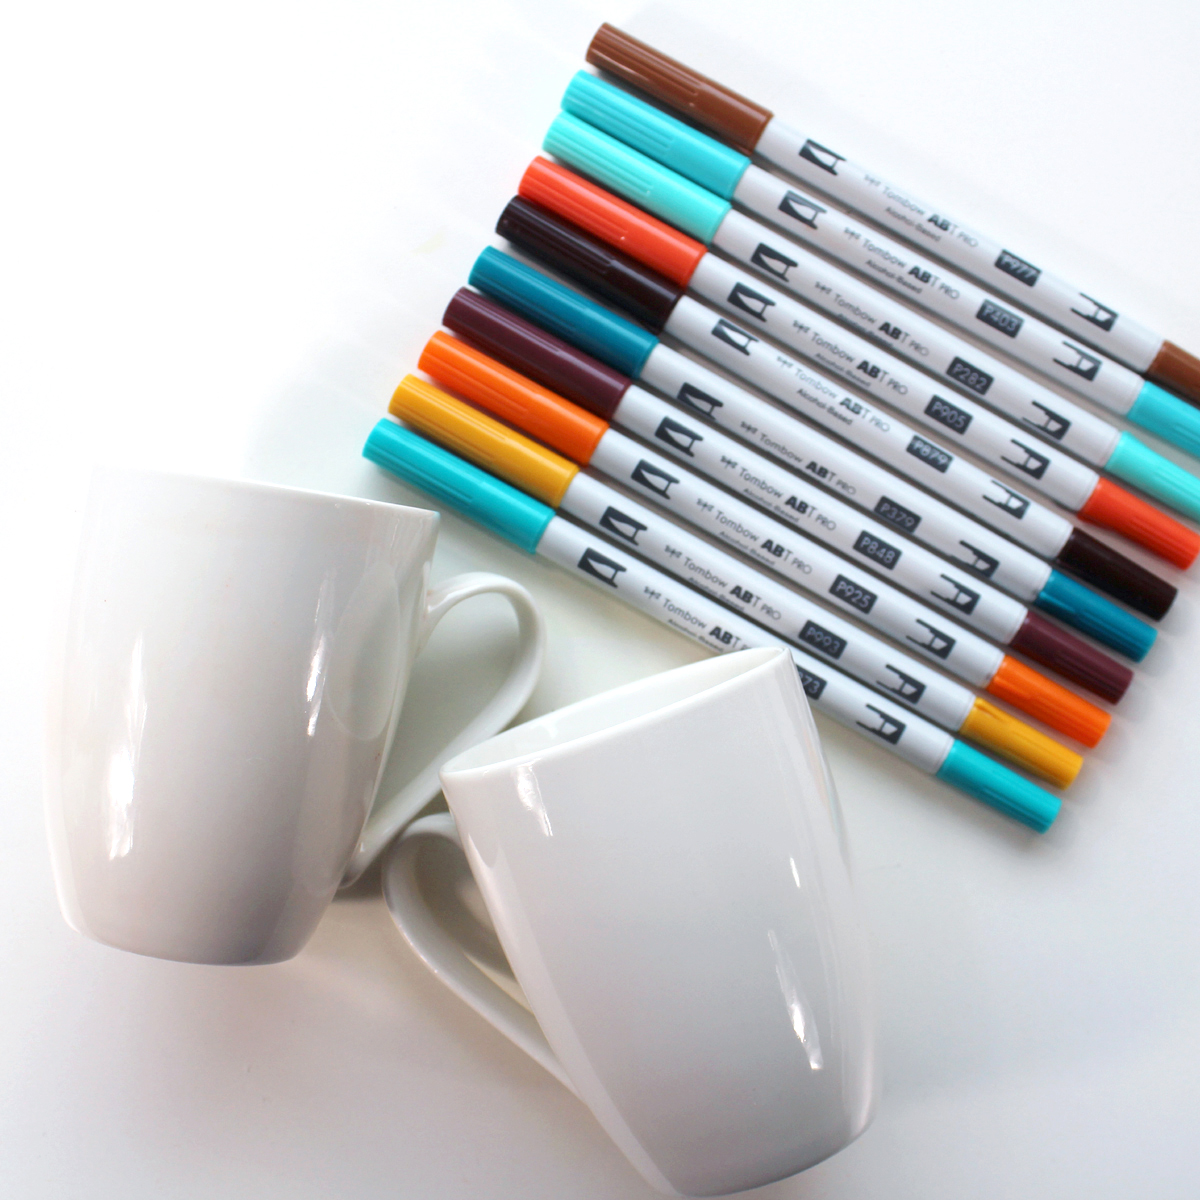 Make Color Block Autumn Mugs With ABT PRO Markers - Natalie Shaw